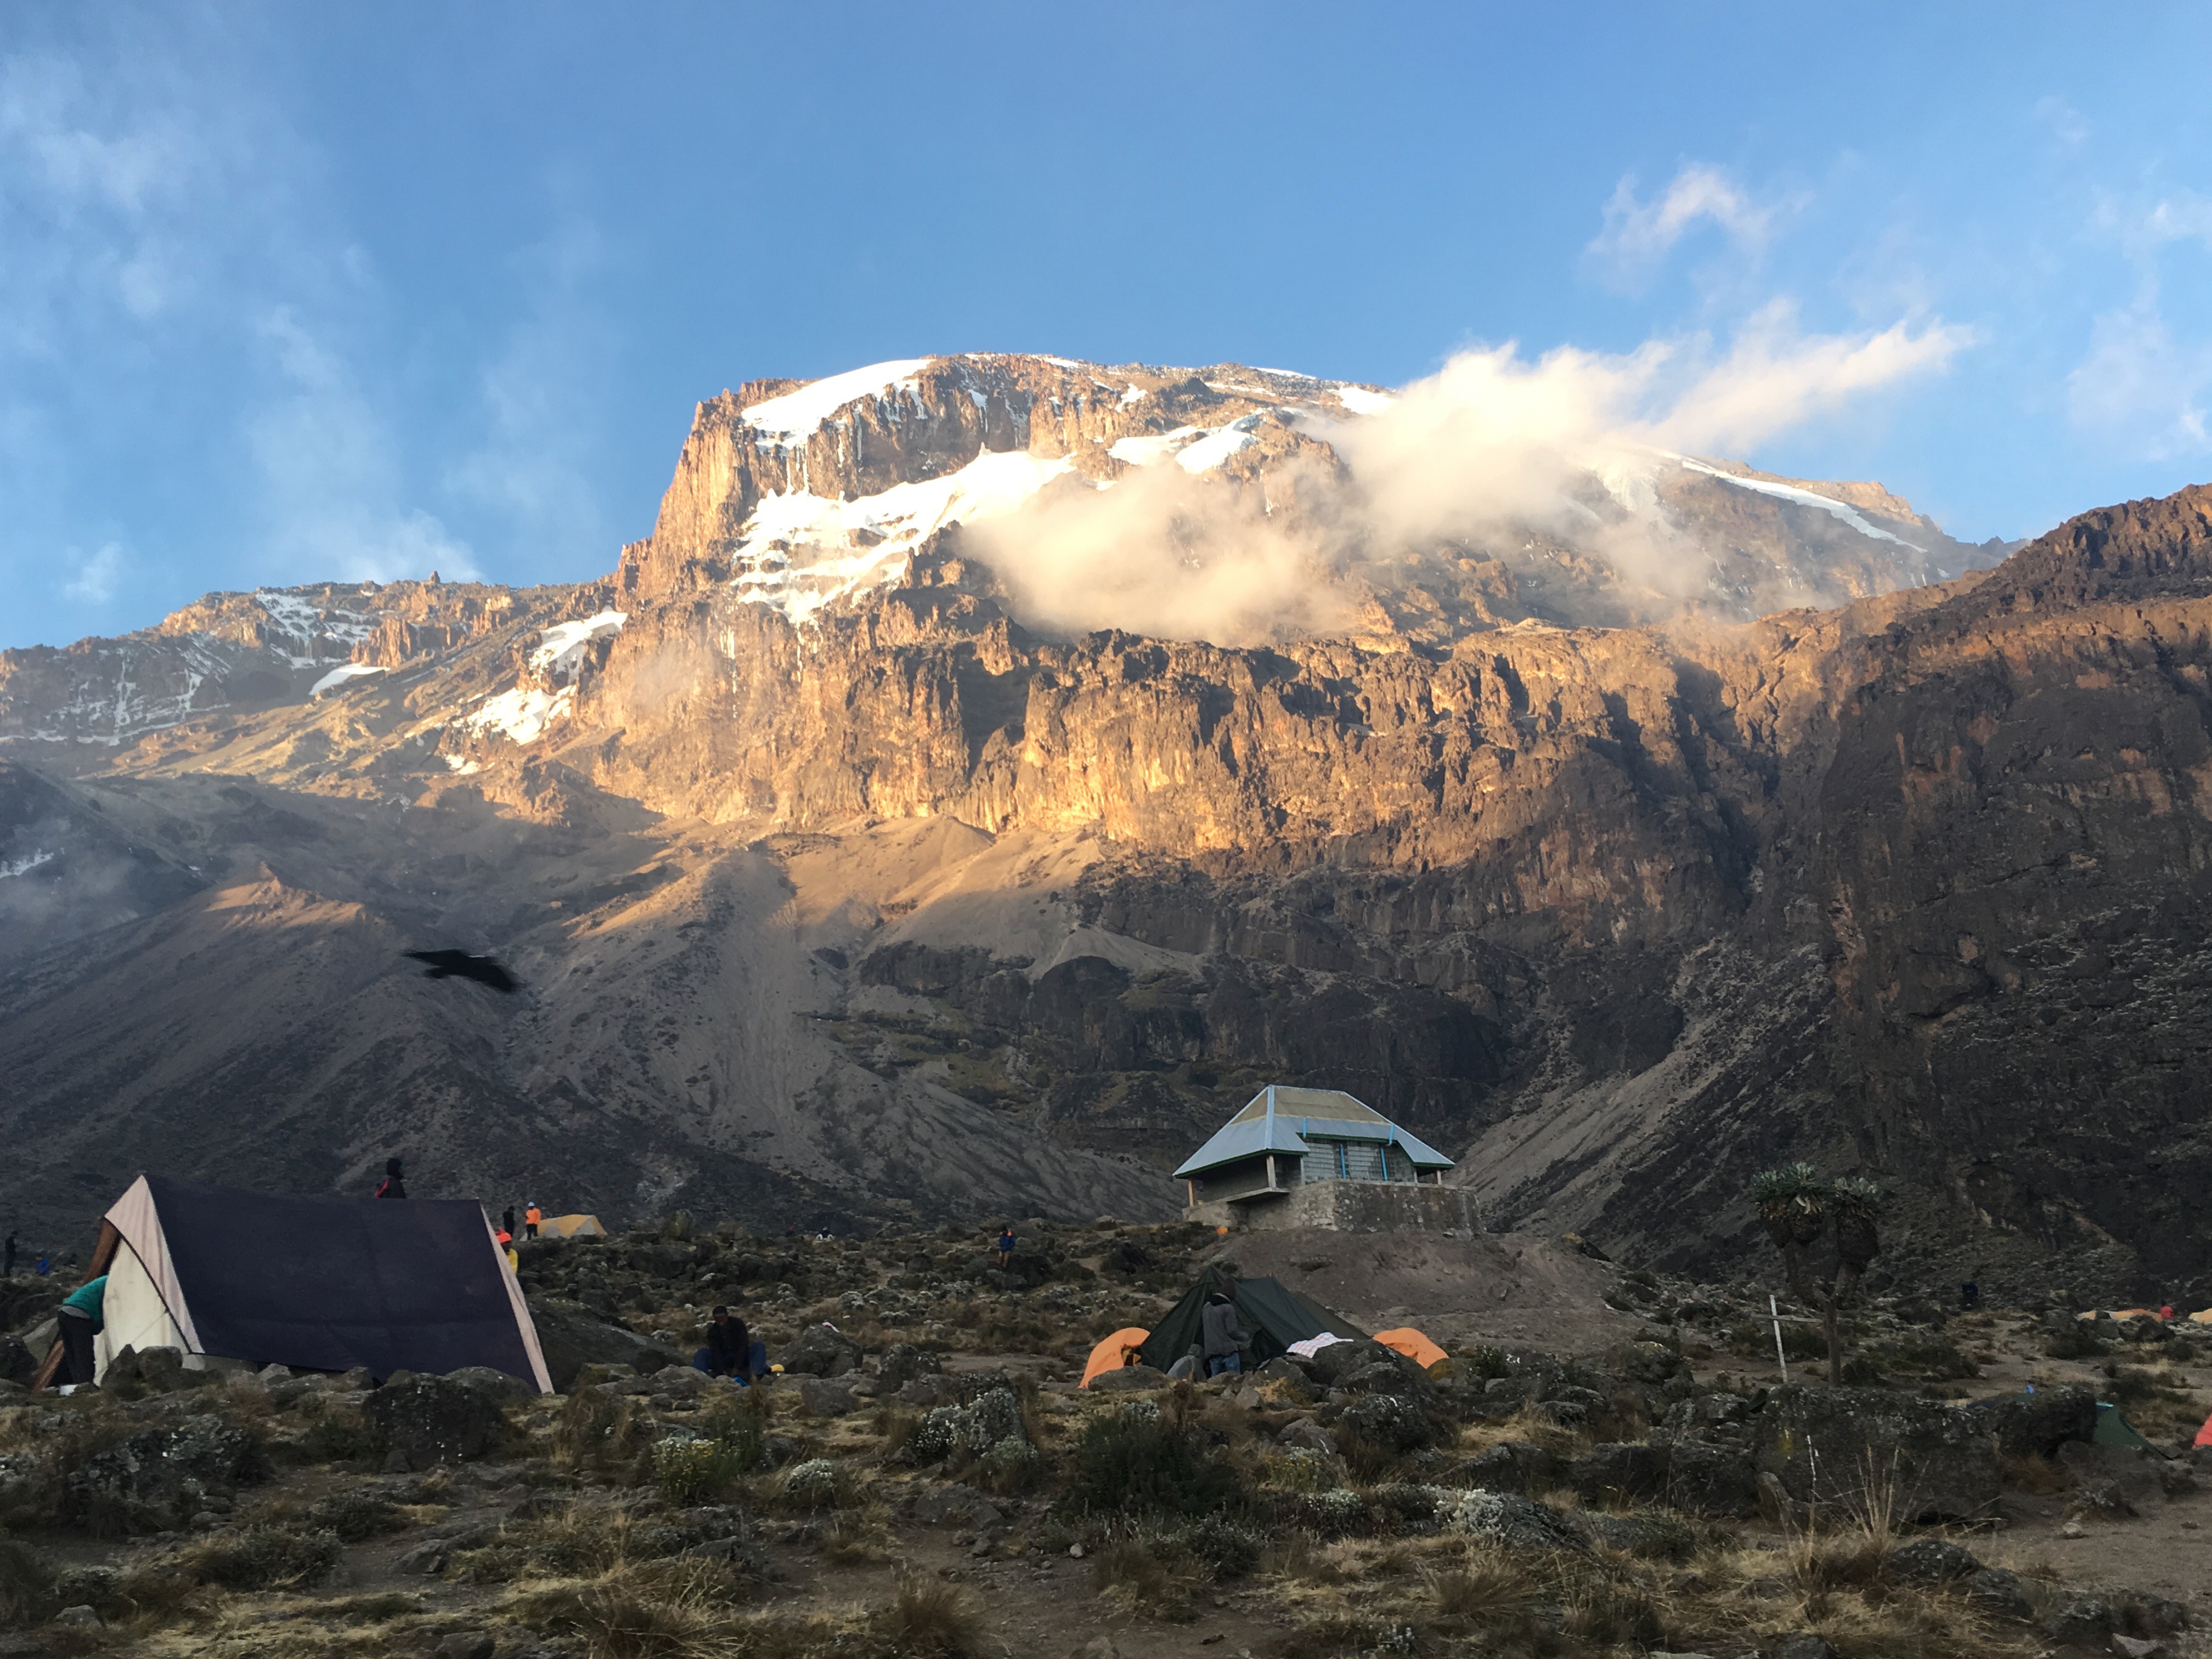 Photo of tents set up at the base of a mountain ridge. Photo by the author.